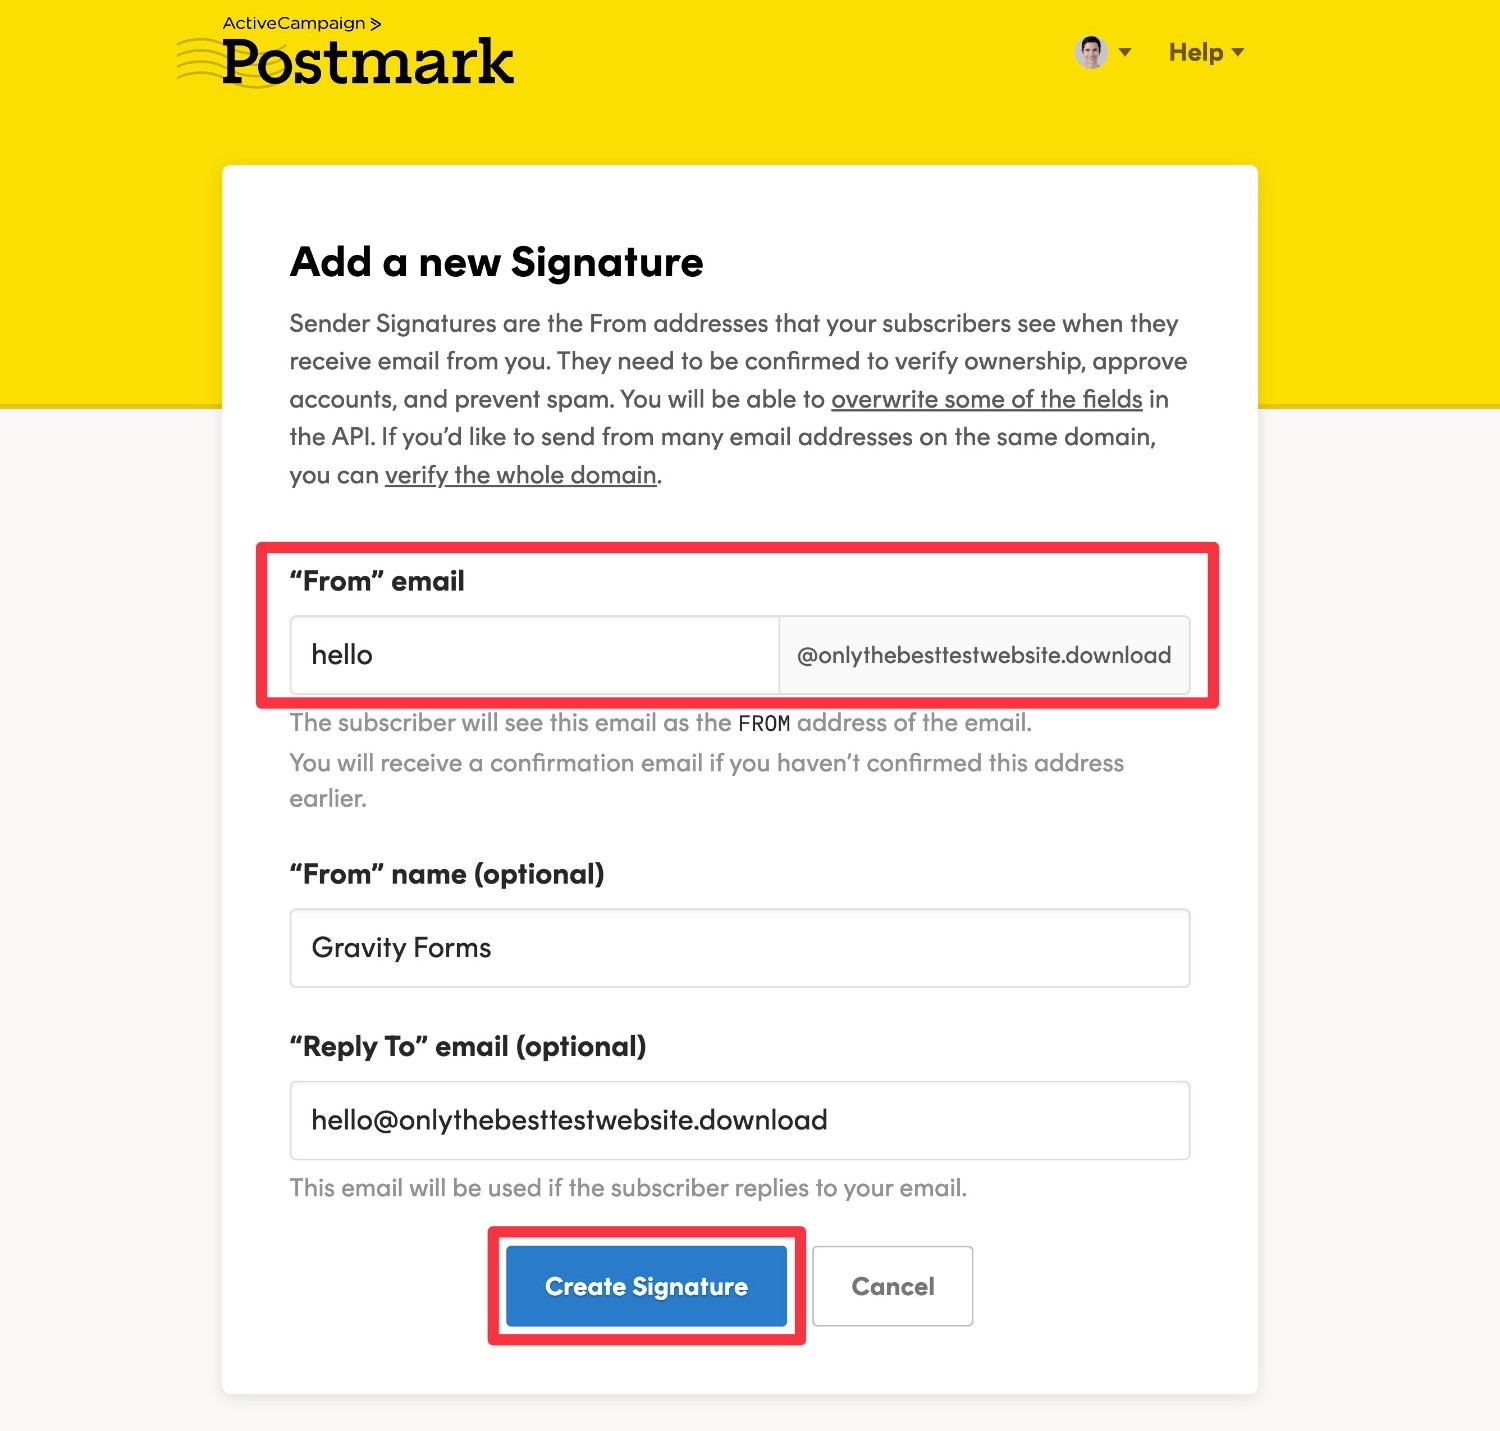 How to add a new signature